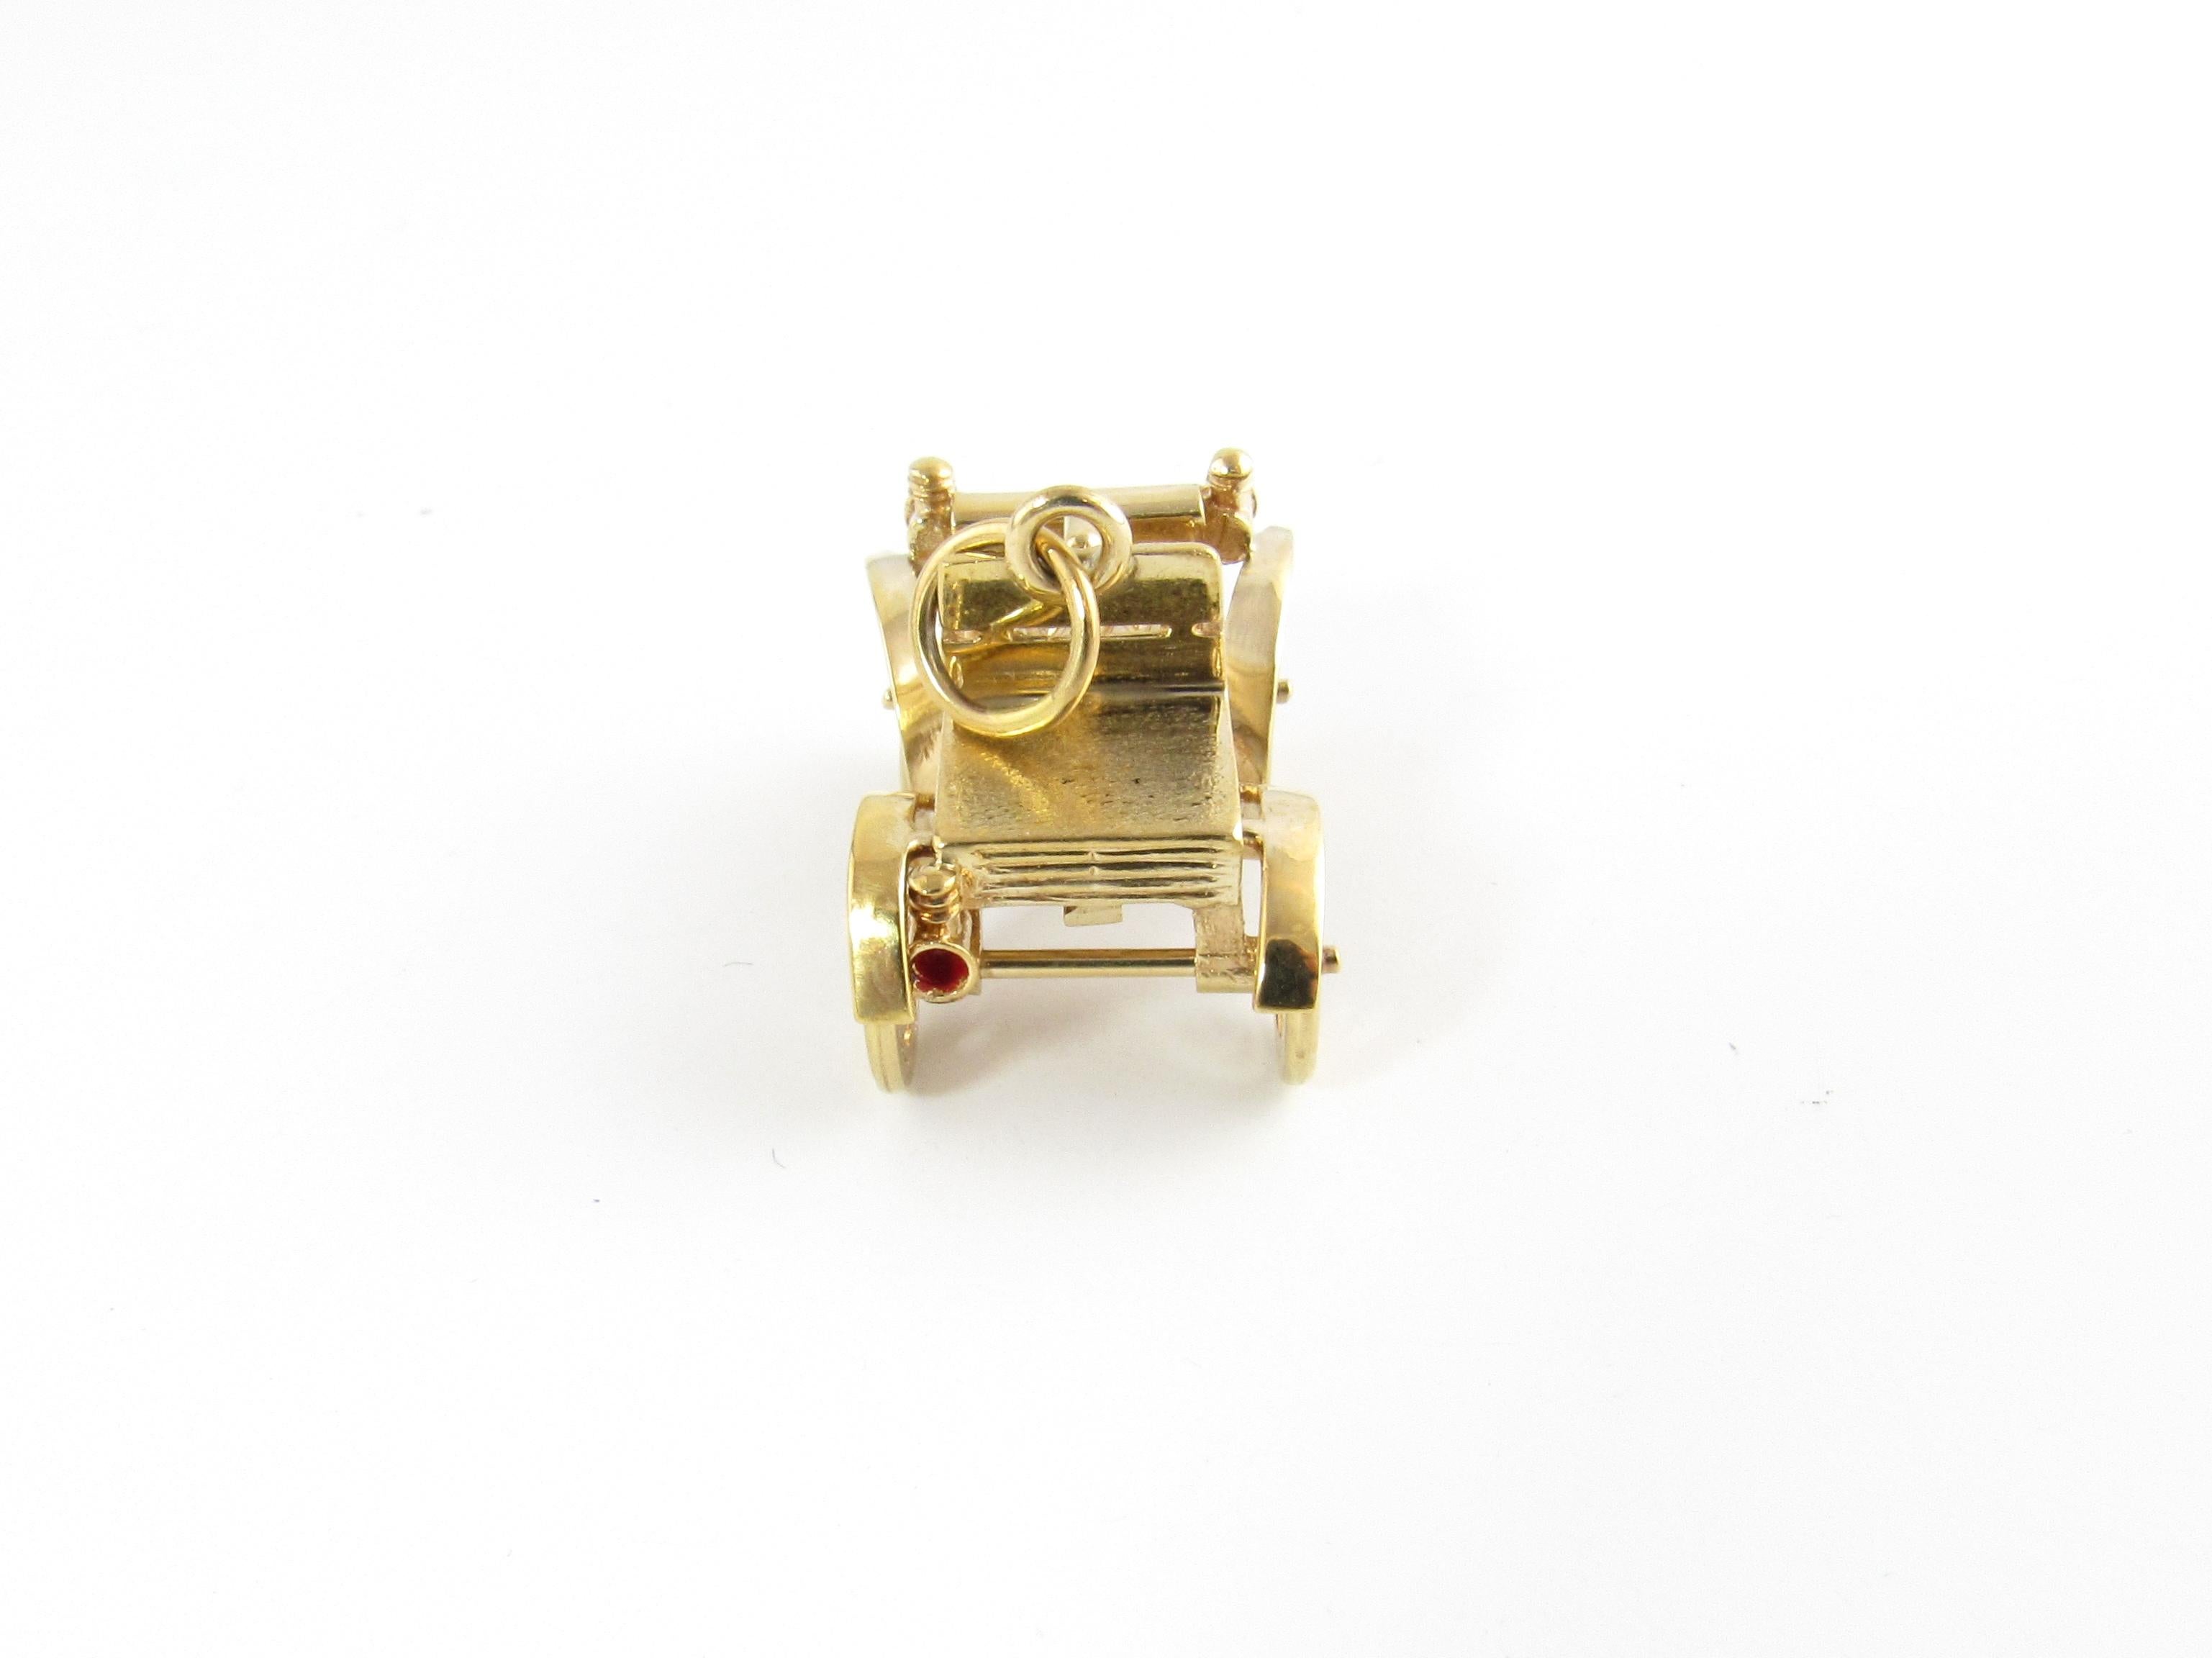 14 Karat Yellow Gold Electric Motor Car Charm-

Perfect gift for the vintage care enthusiast!

This 3D mechanical charm features an antique motor car with moving wheels and enameled headlights and brake light. Meticulously detailed in 14K yellow